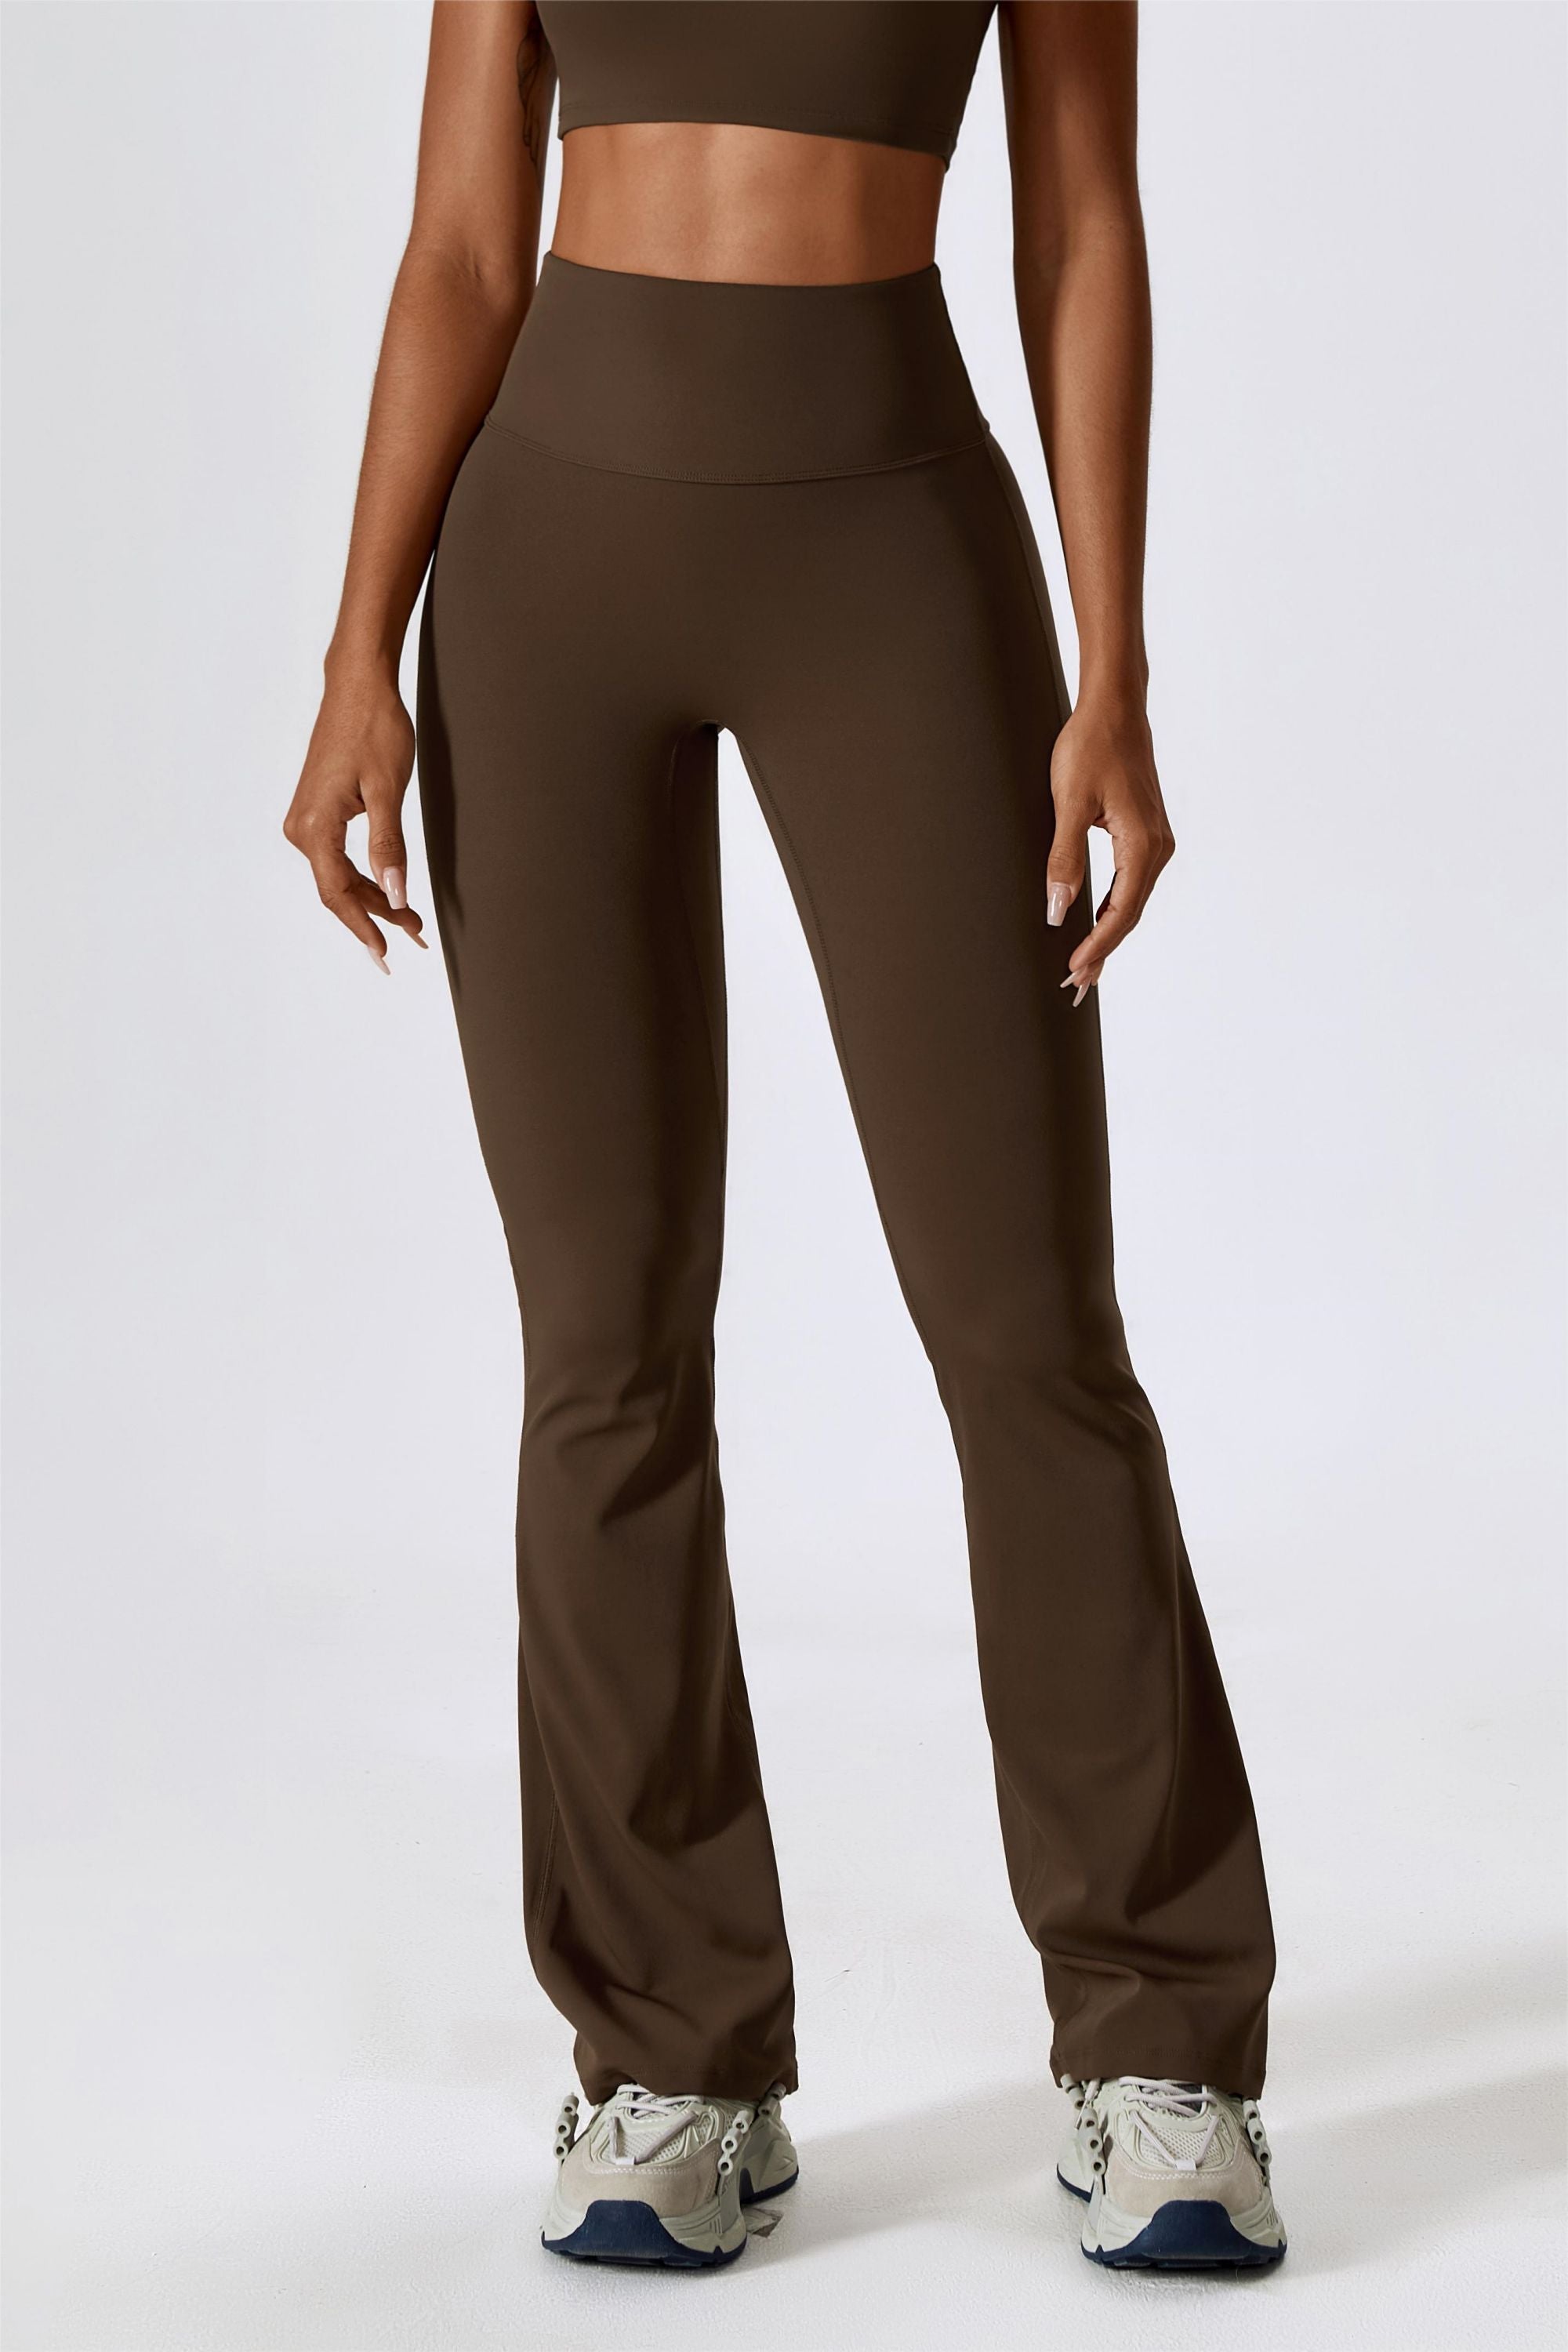 I AM BEAUTIFUL ACTIVE SCRUCH FLARE LEGGINGS- BROWN – Nirie Collection